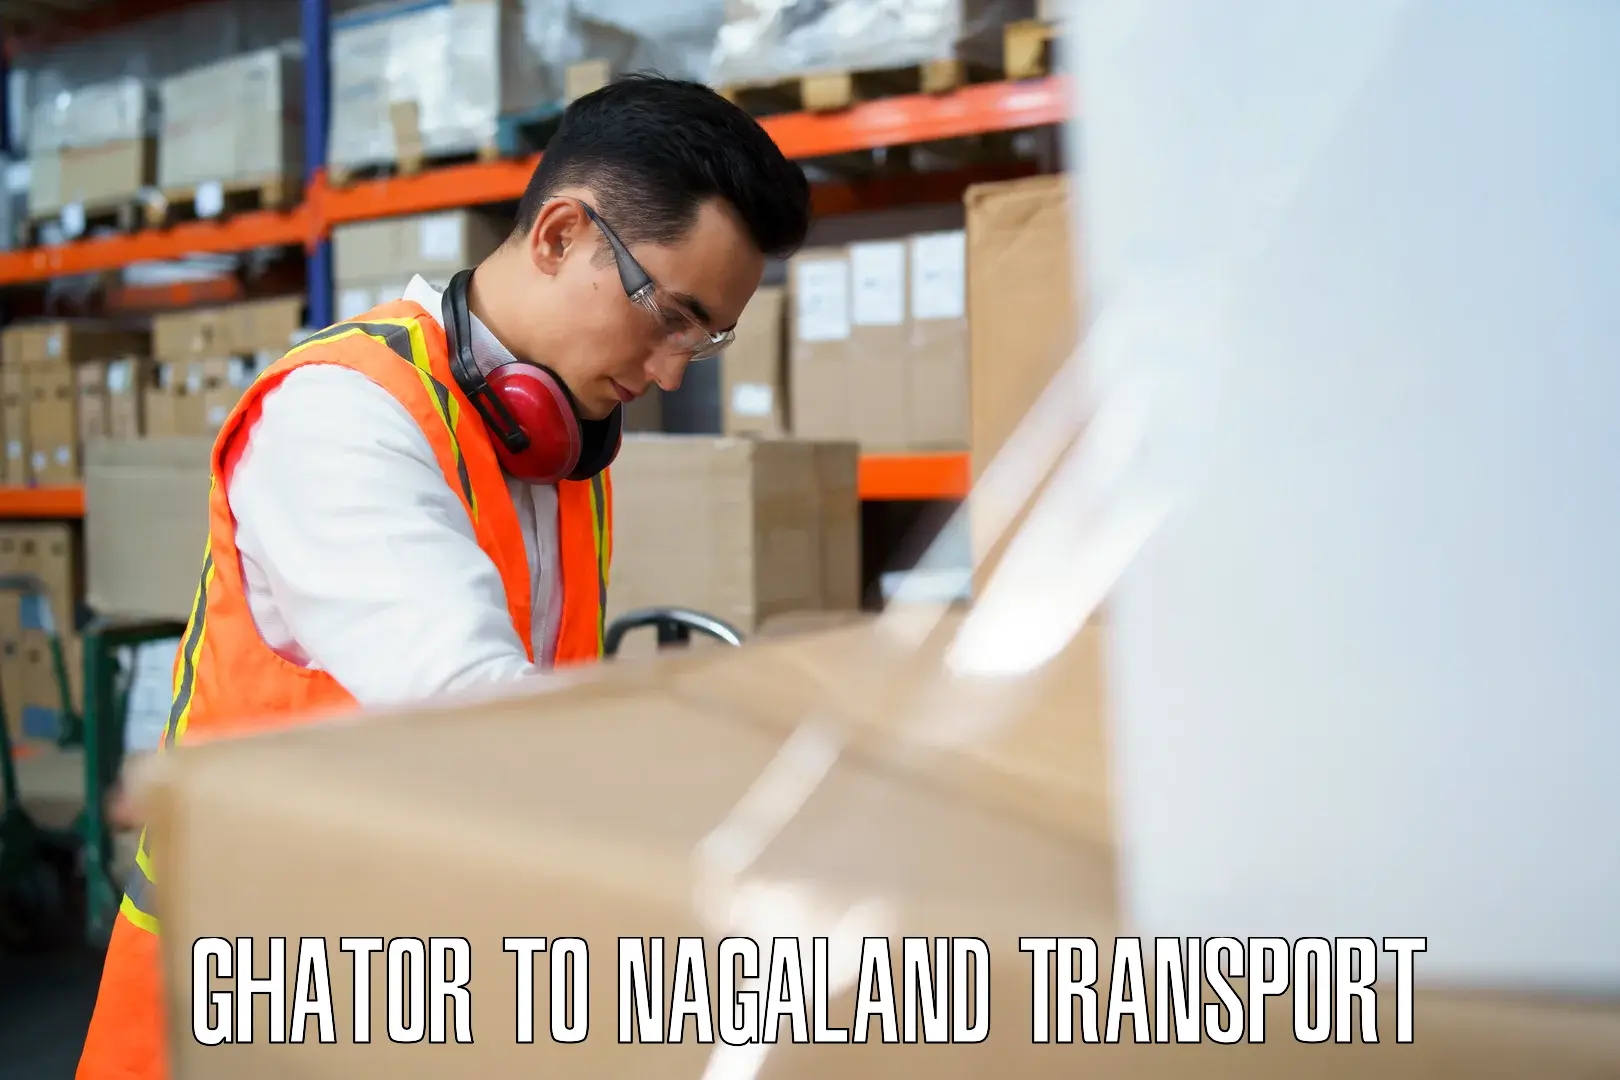 Road transport services Ghator to Nagaland